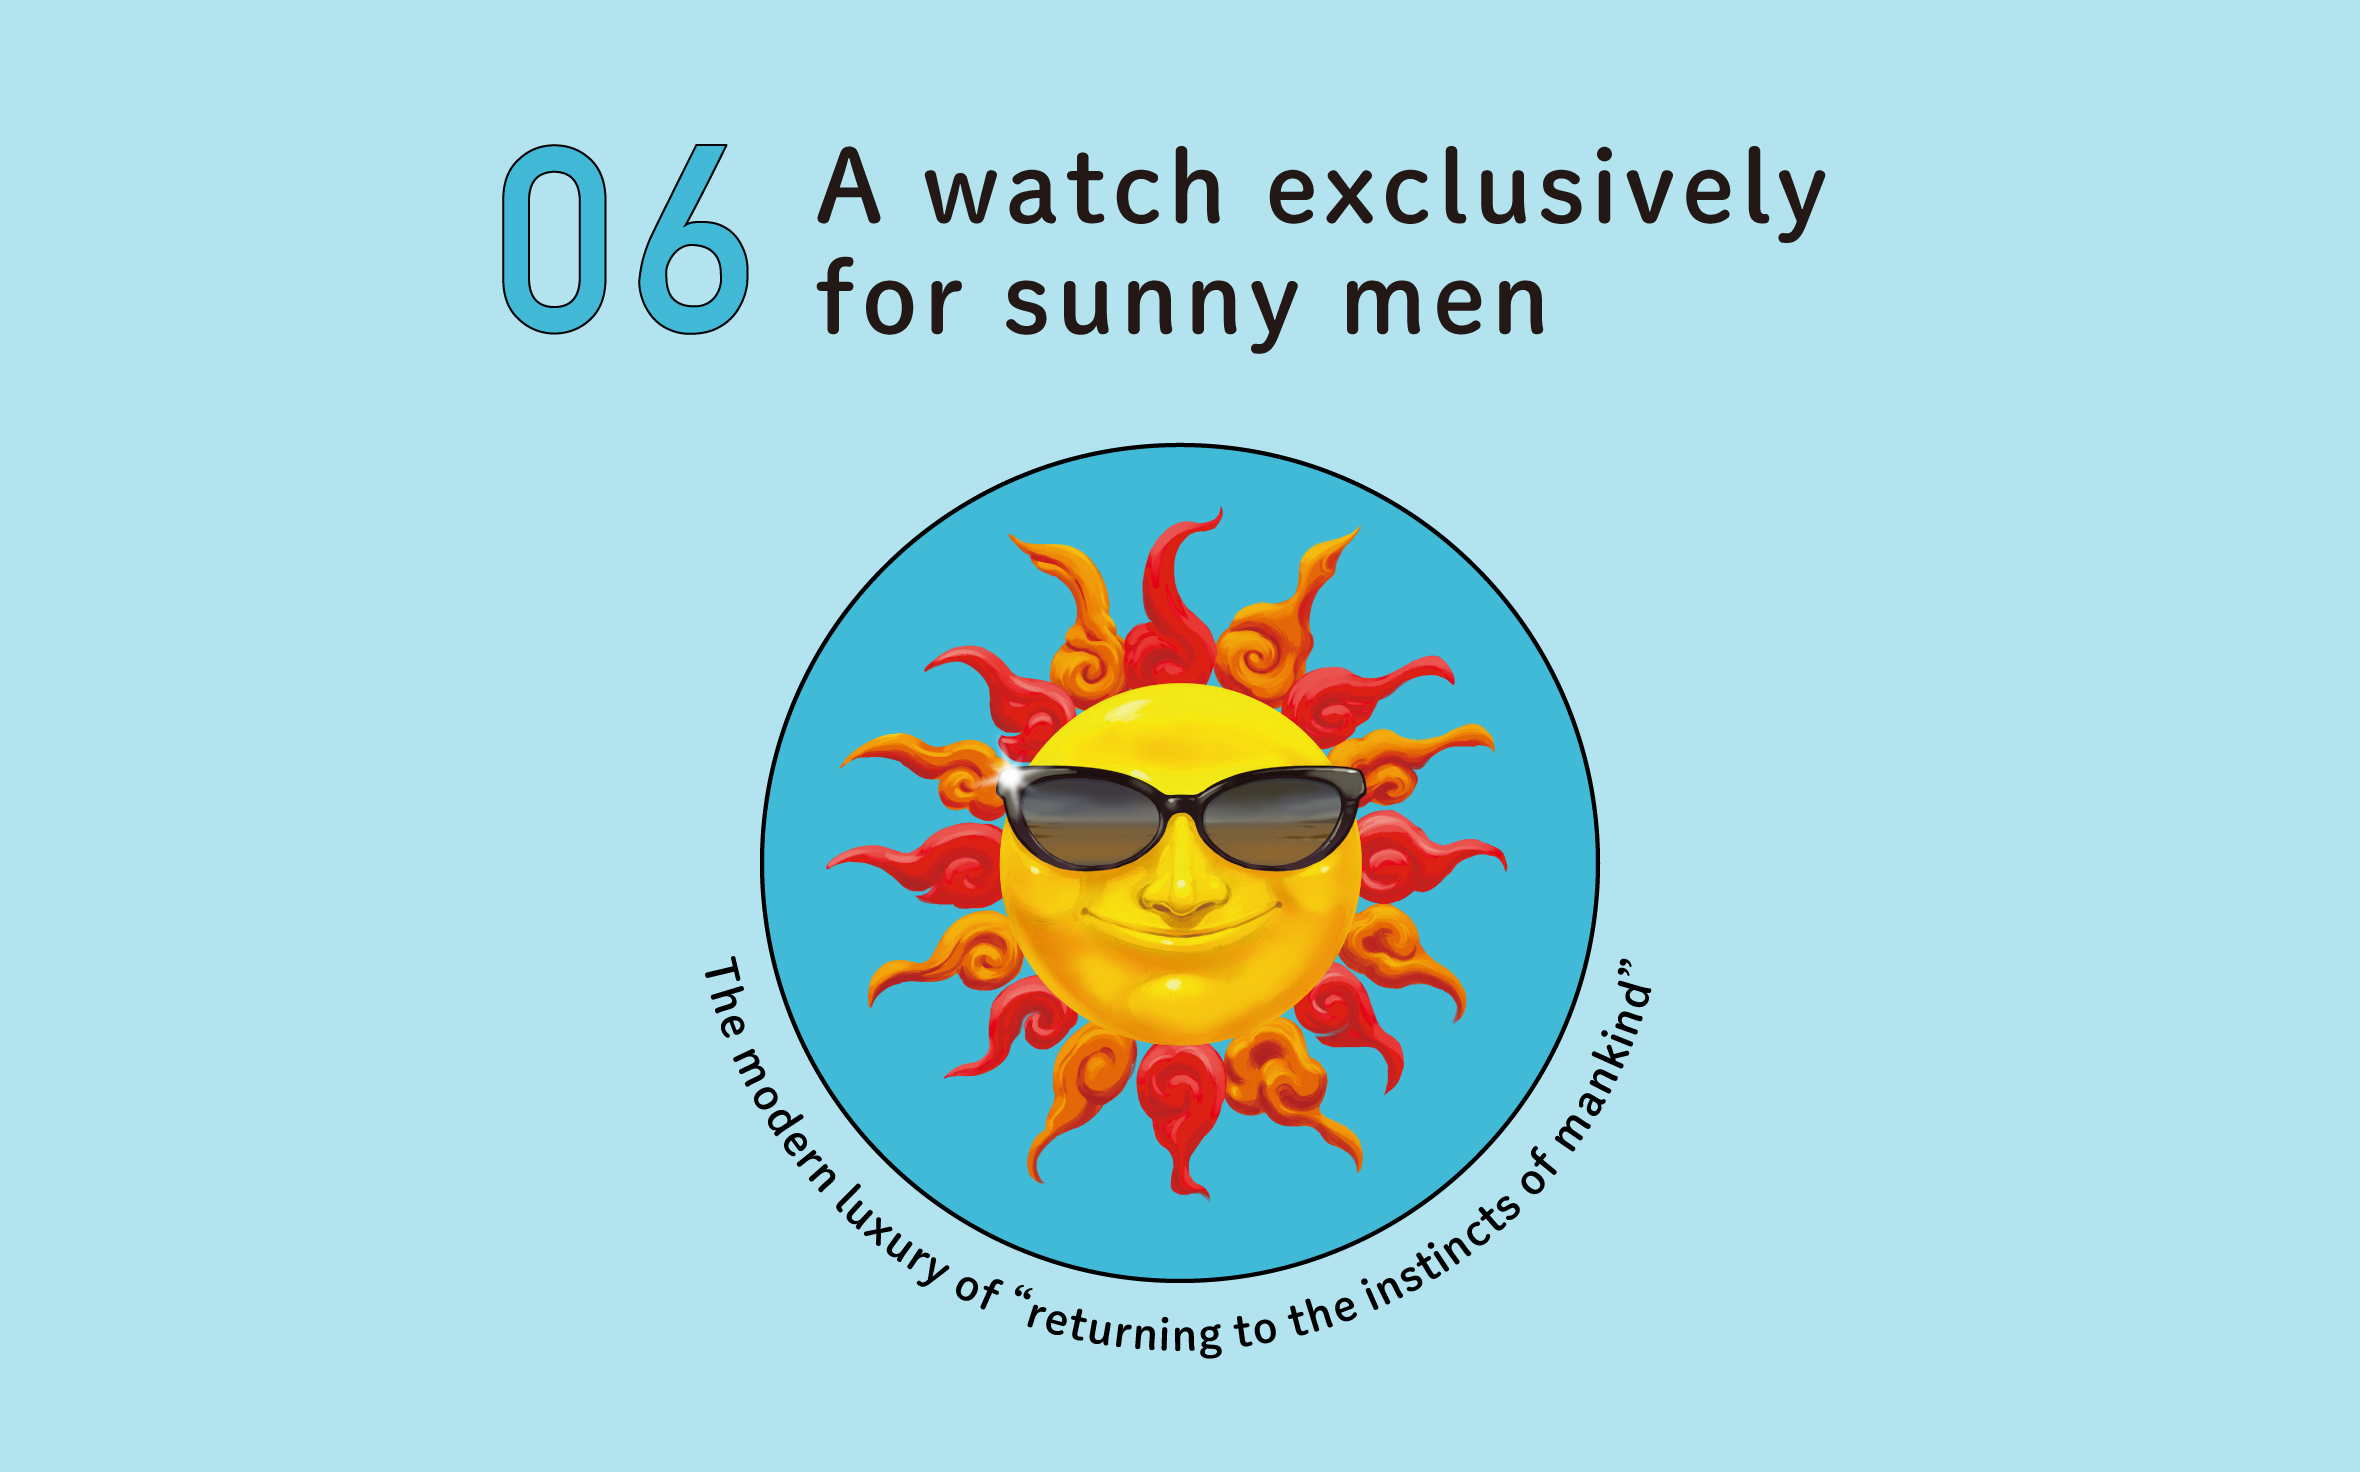 A watch exclusively for sunny men who bring good weather 